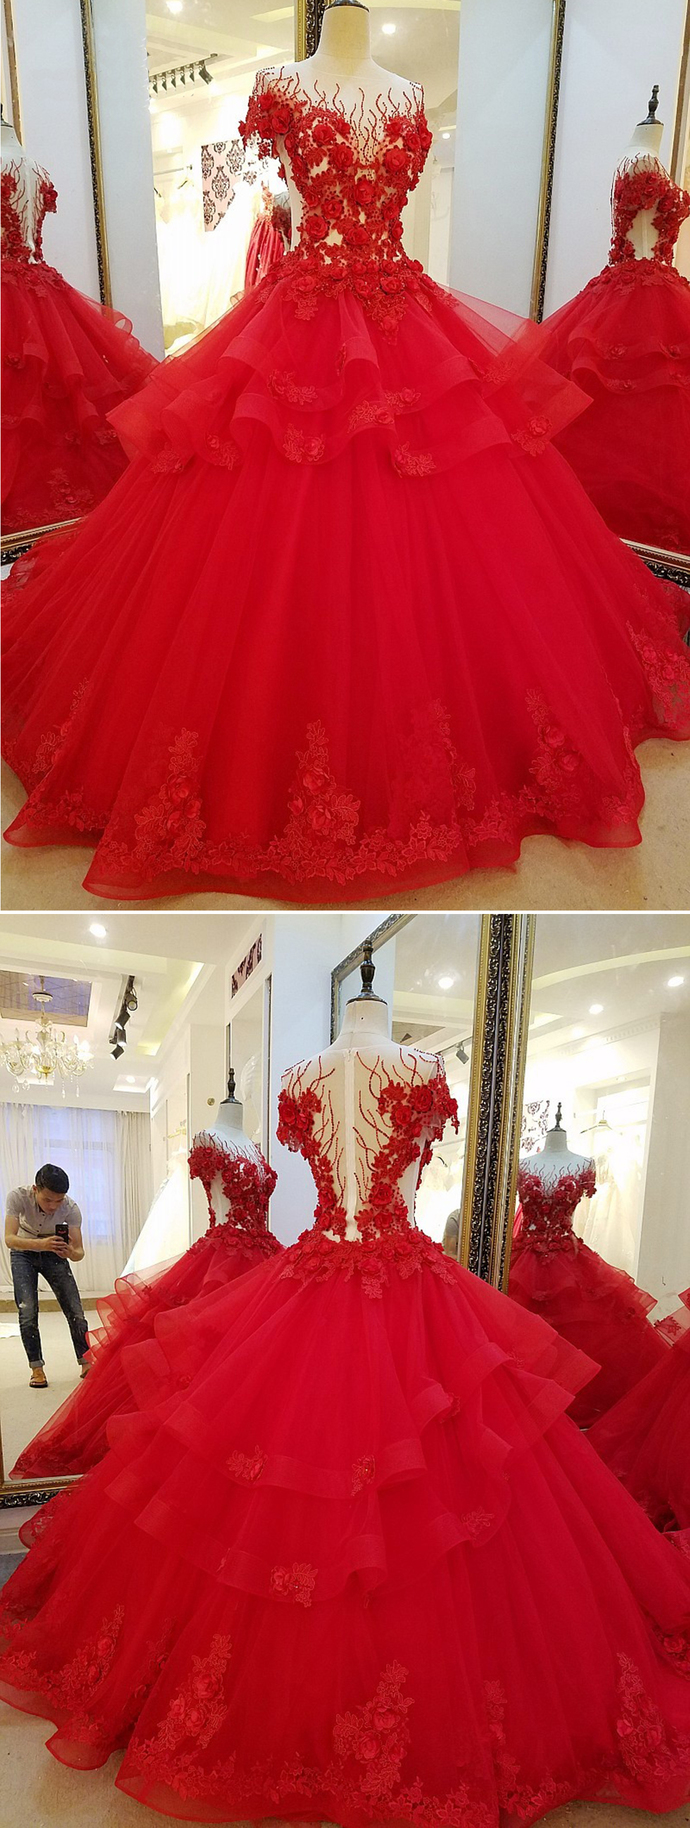 Red Tulle See Through 3d Lace Flower Beaded Multi-layer Ball Gown, Formal Prom Dress With Sleeve M727